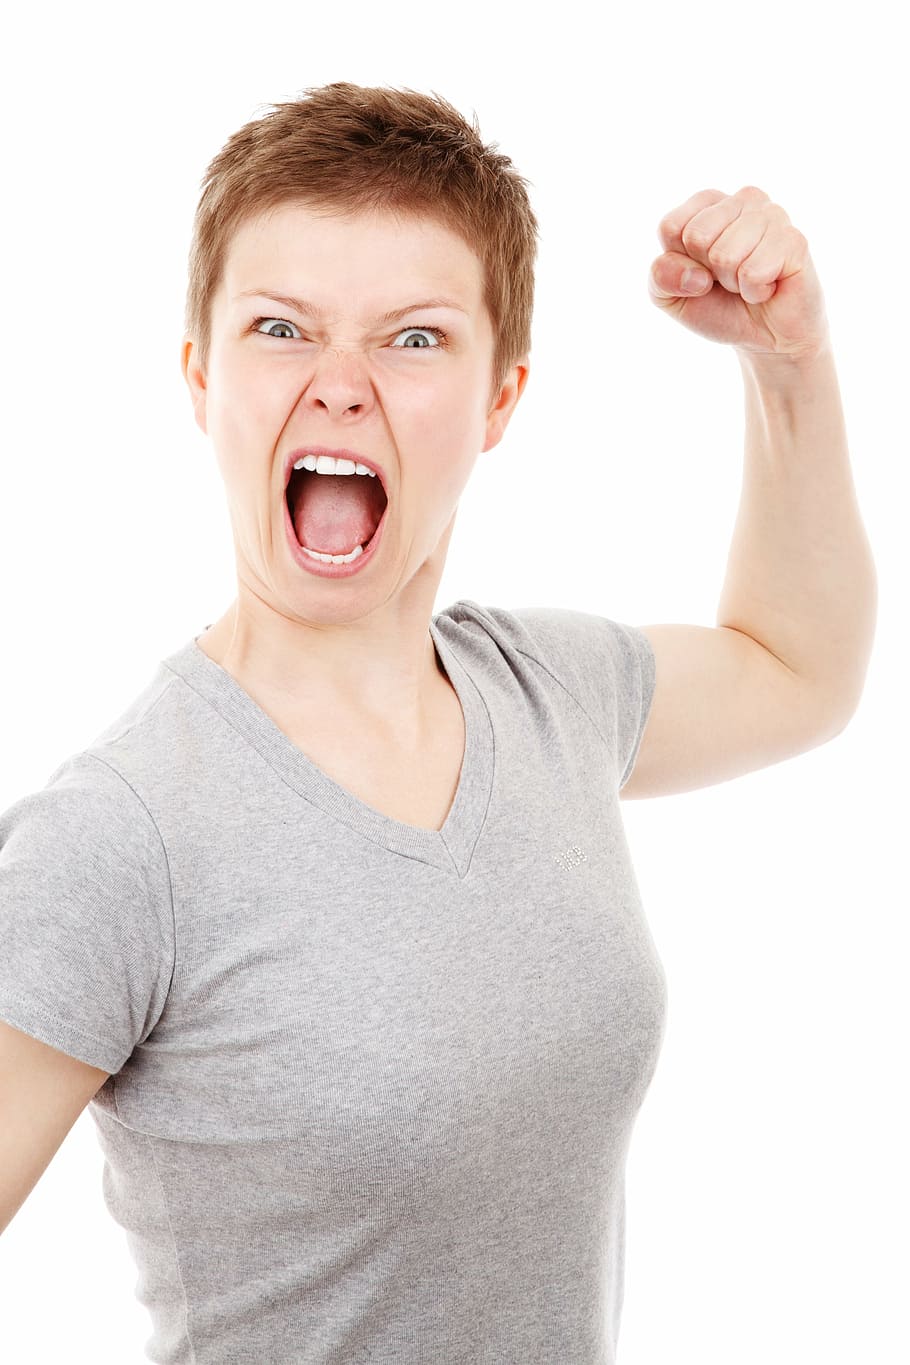 women wearing gray v-neck t-shirt, anger, angry, bad, isolated